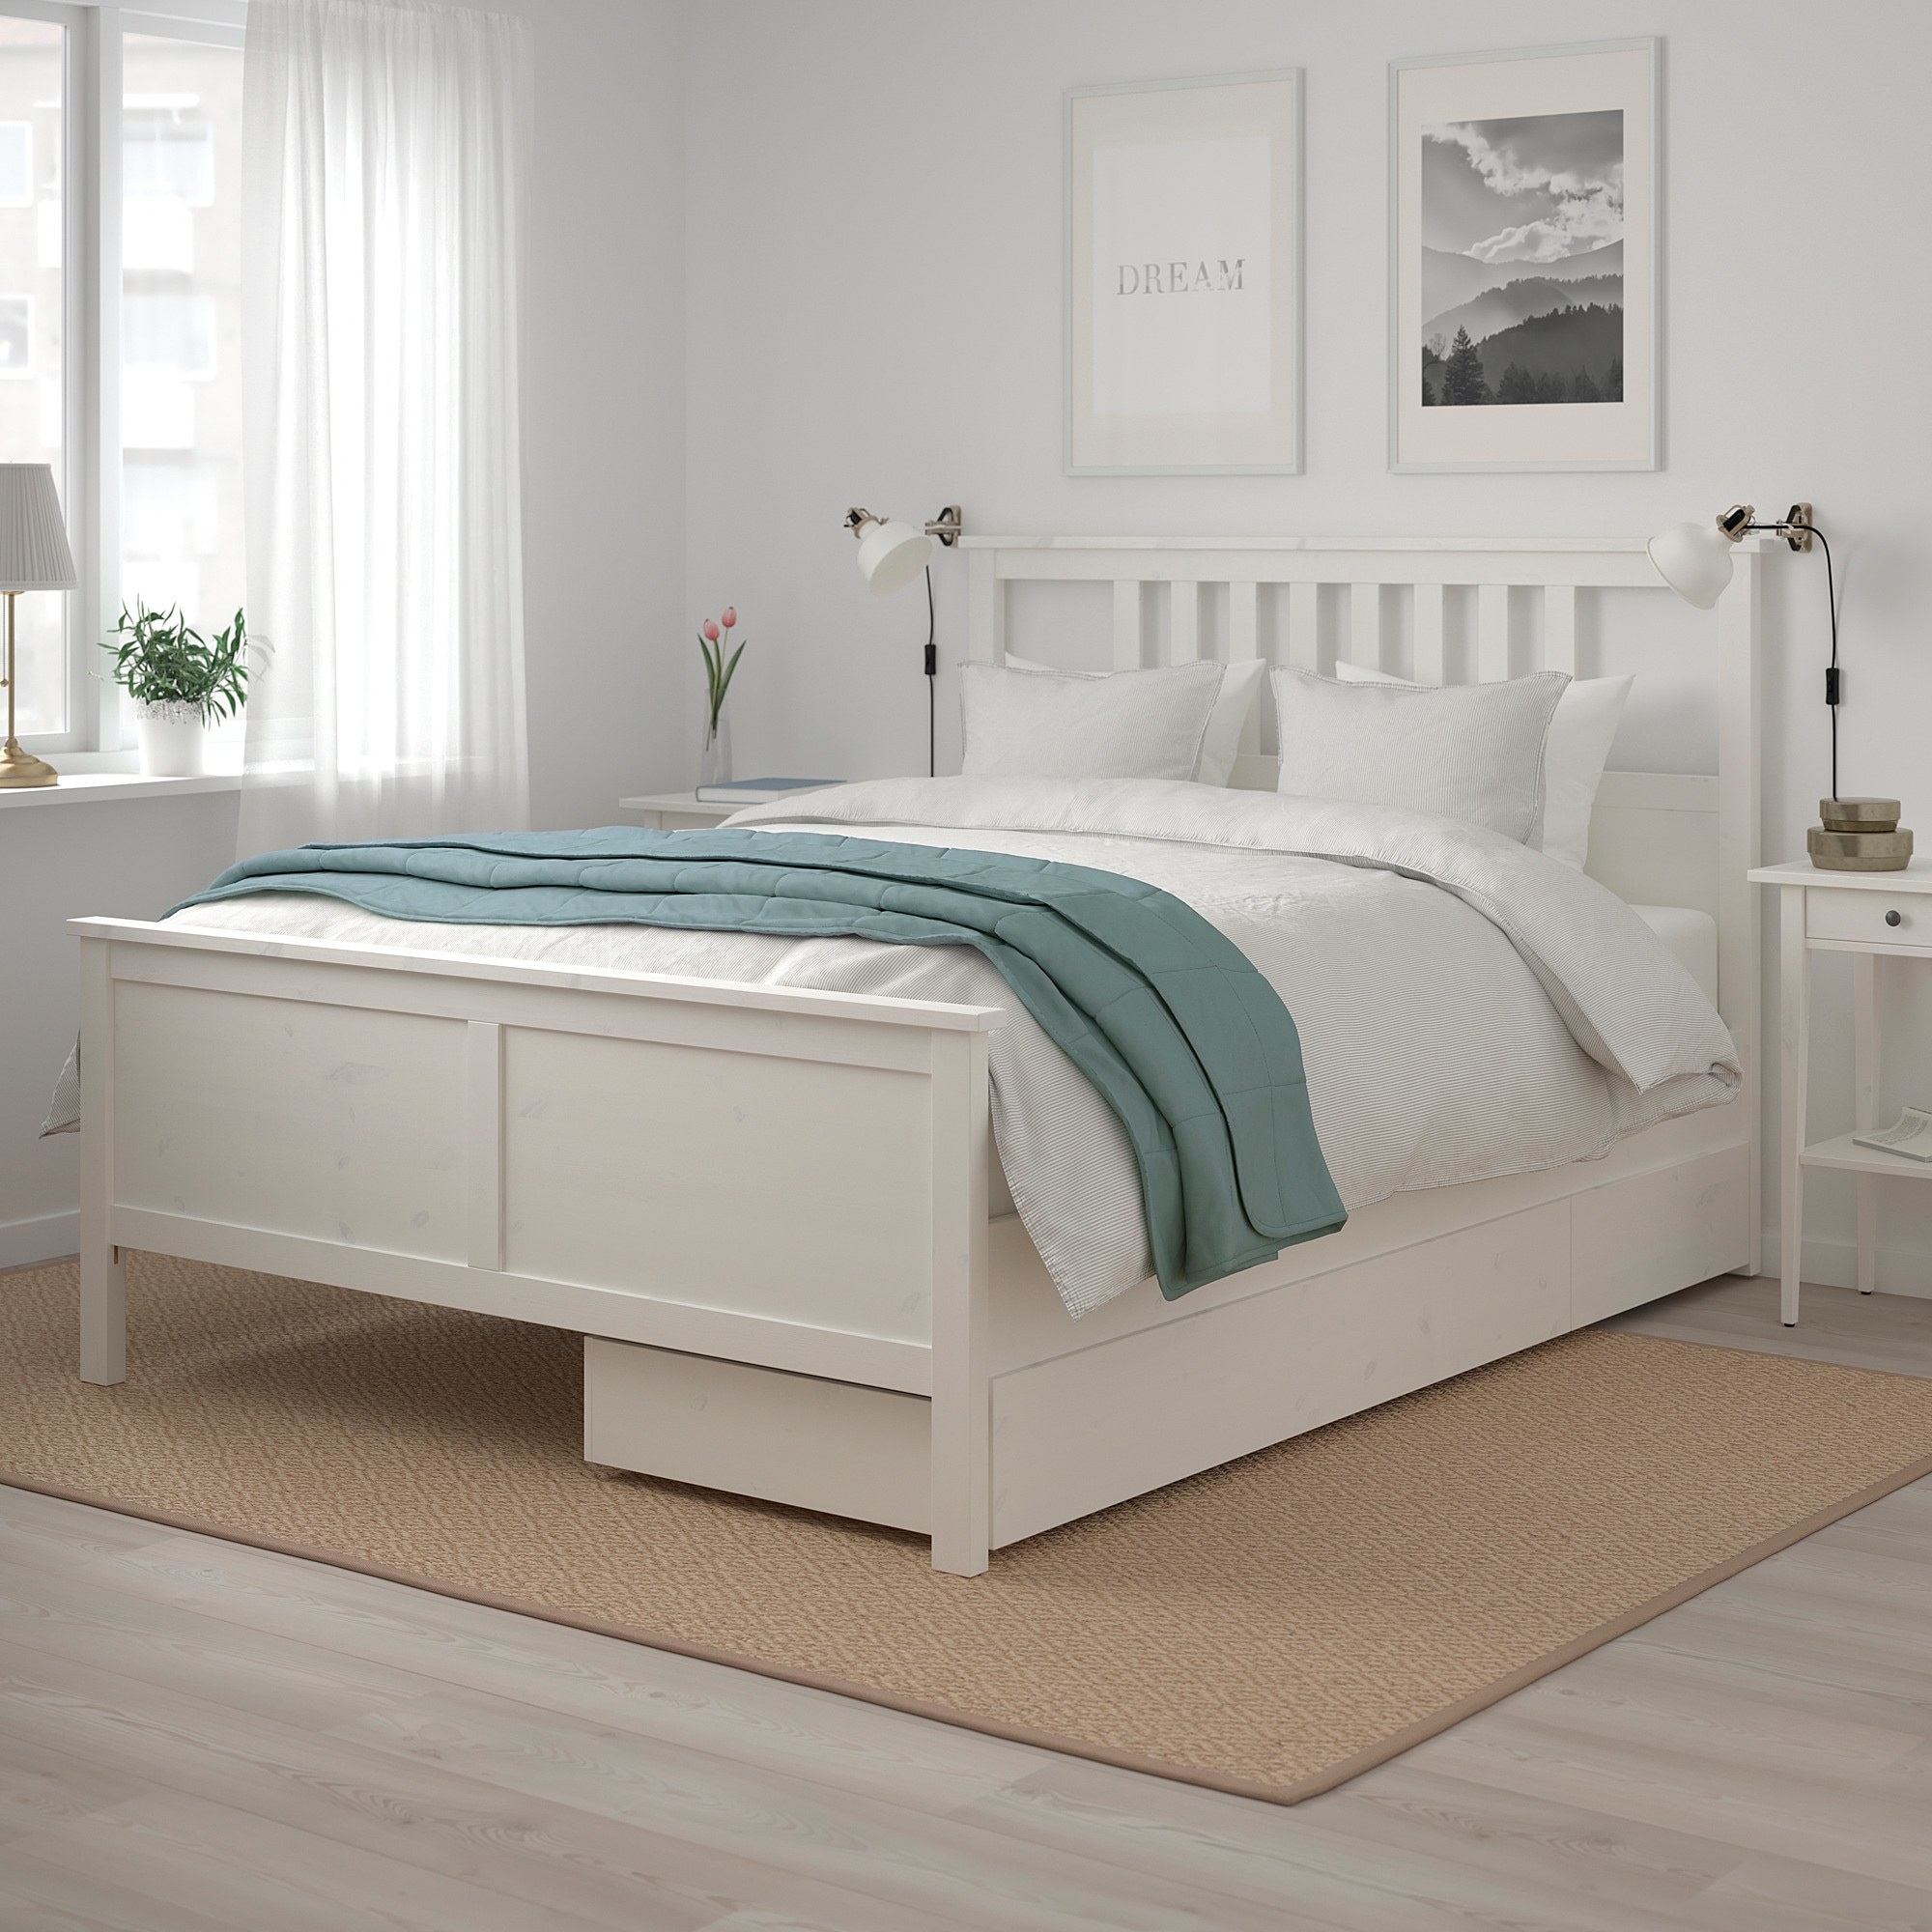 27 Bed Frames That Only Look, White Bed Frame Full